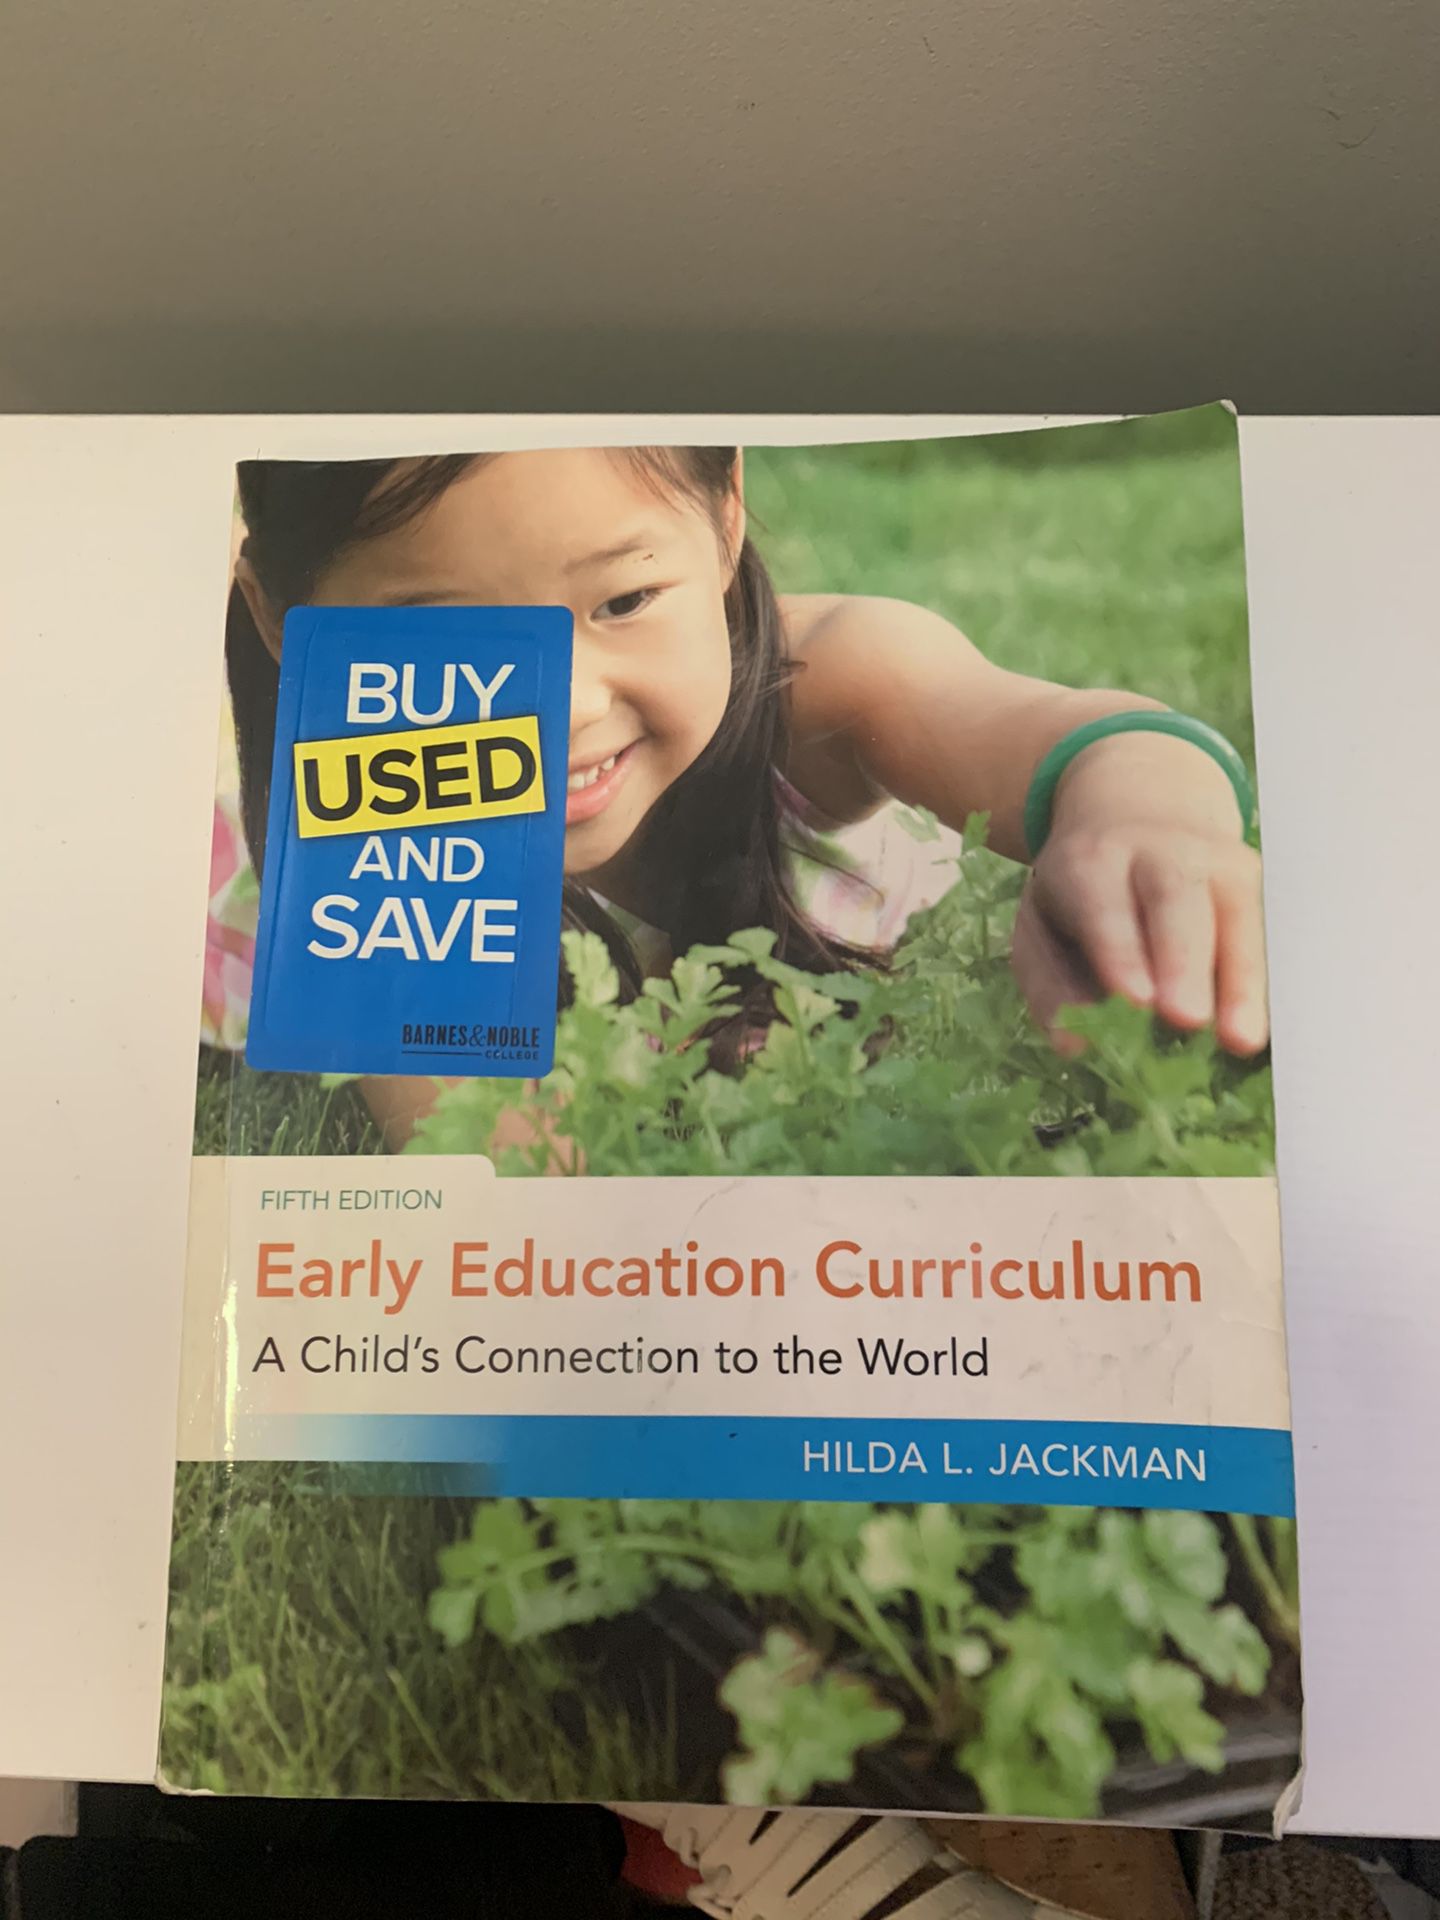 College book “Early Education Curriculum” by Hilda Jackson